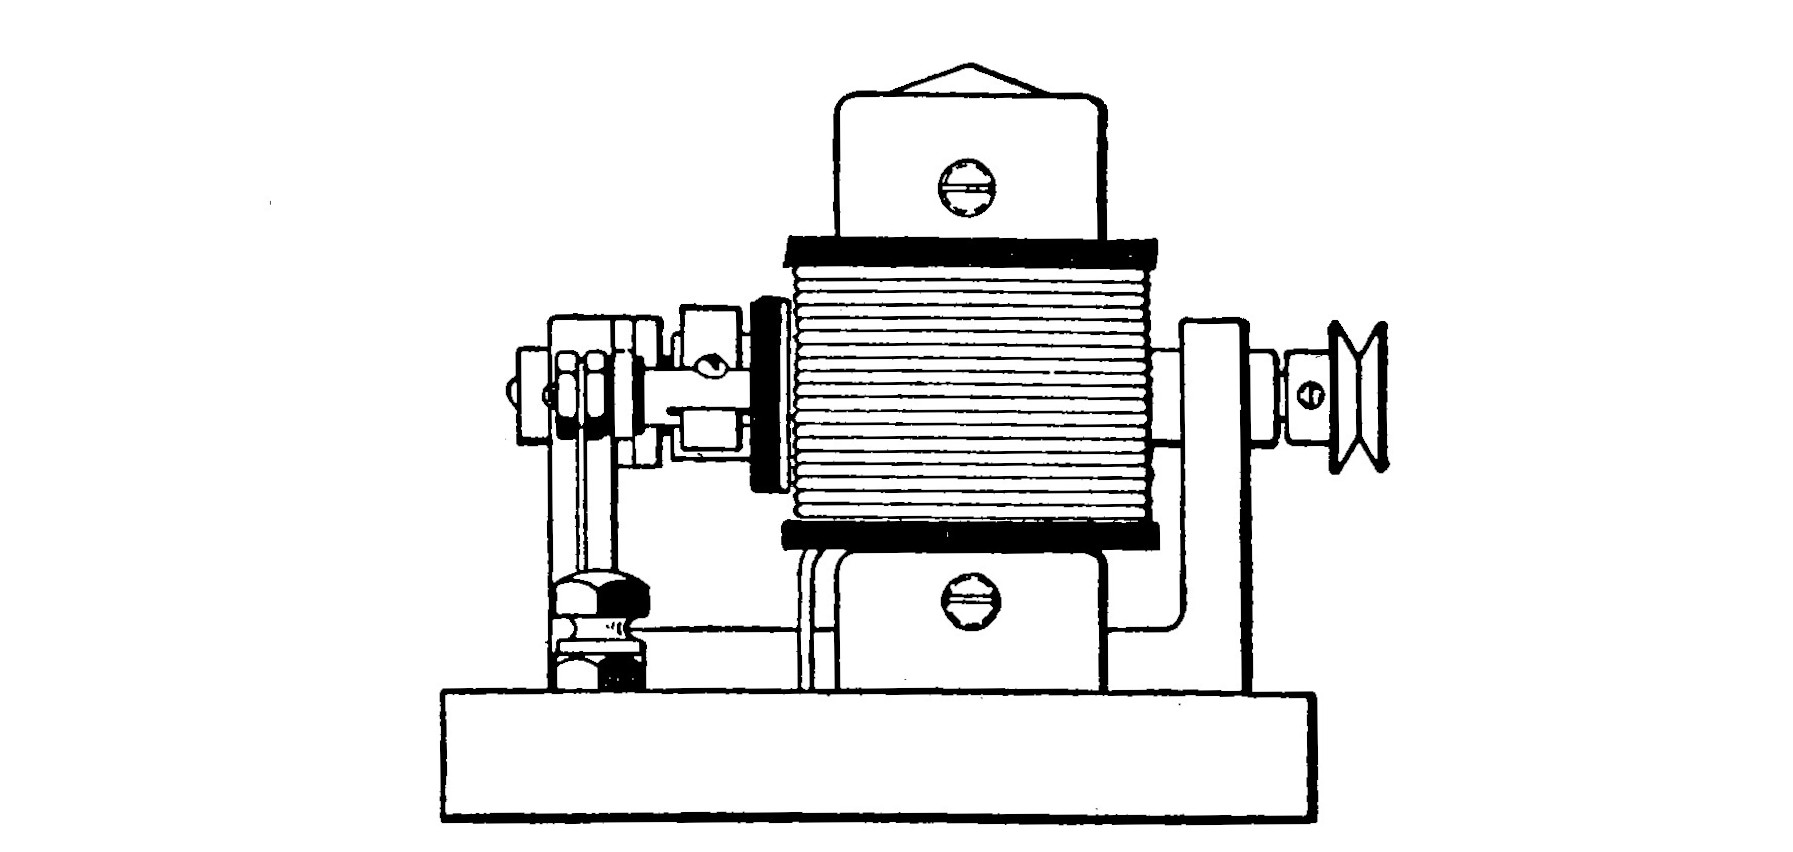 FIG. 72.—Rear view of the completed Horizontal Motor.